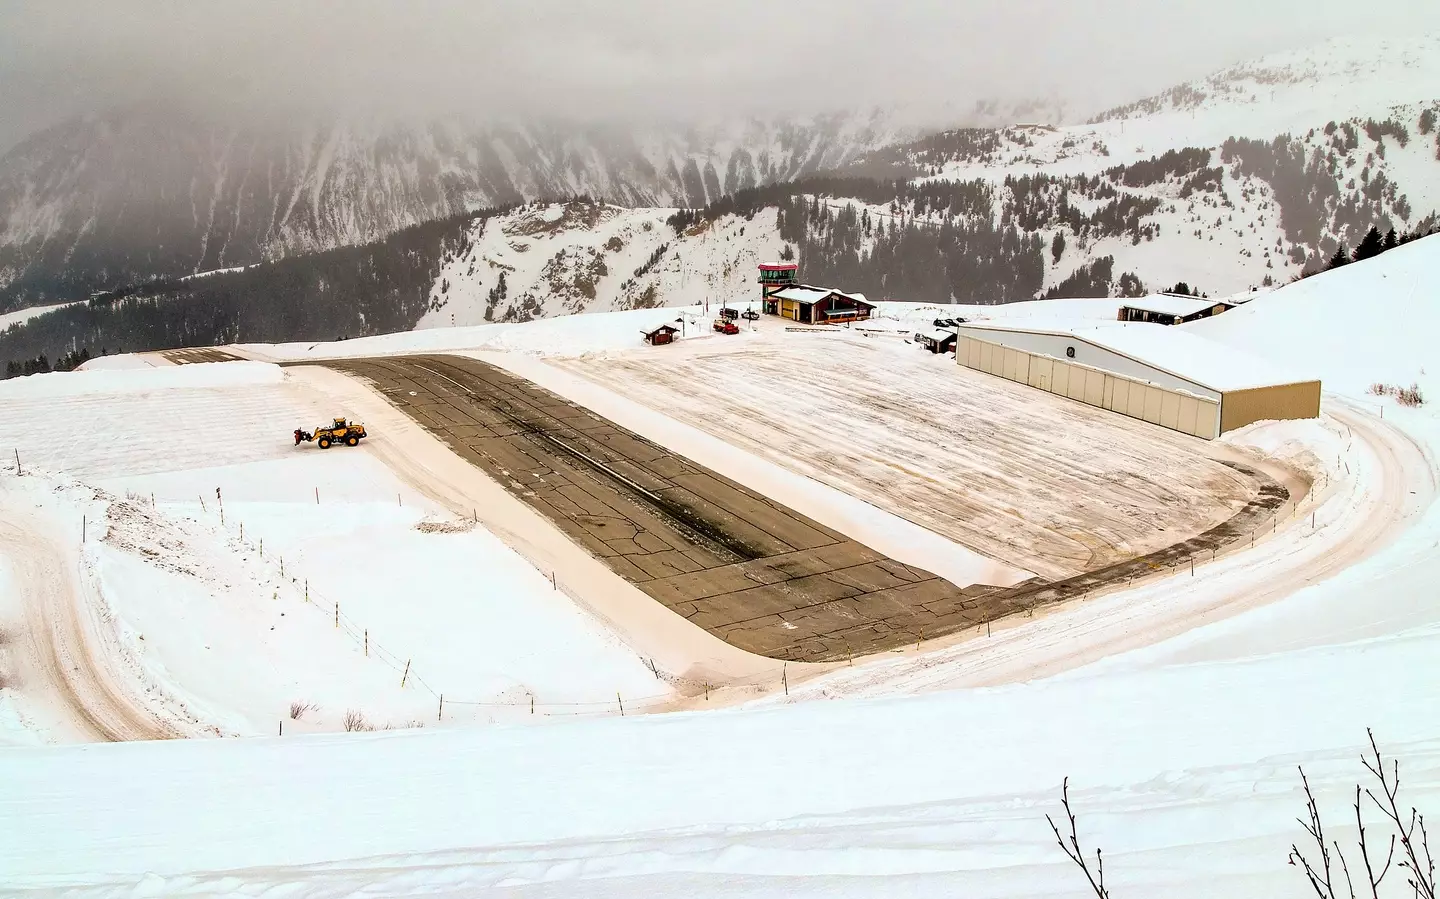 This French airport is for those wanting to hit the slopes.